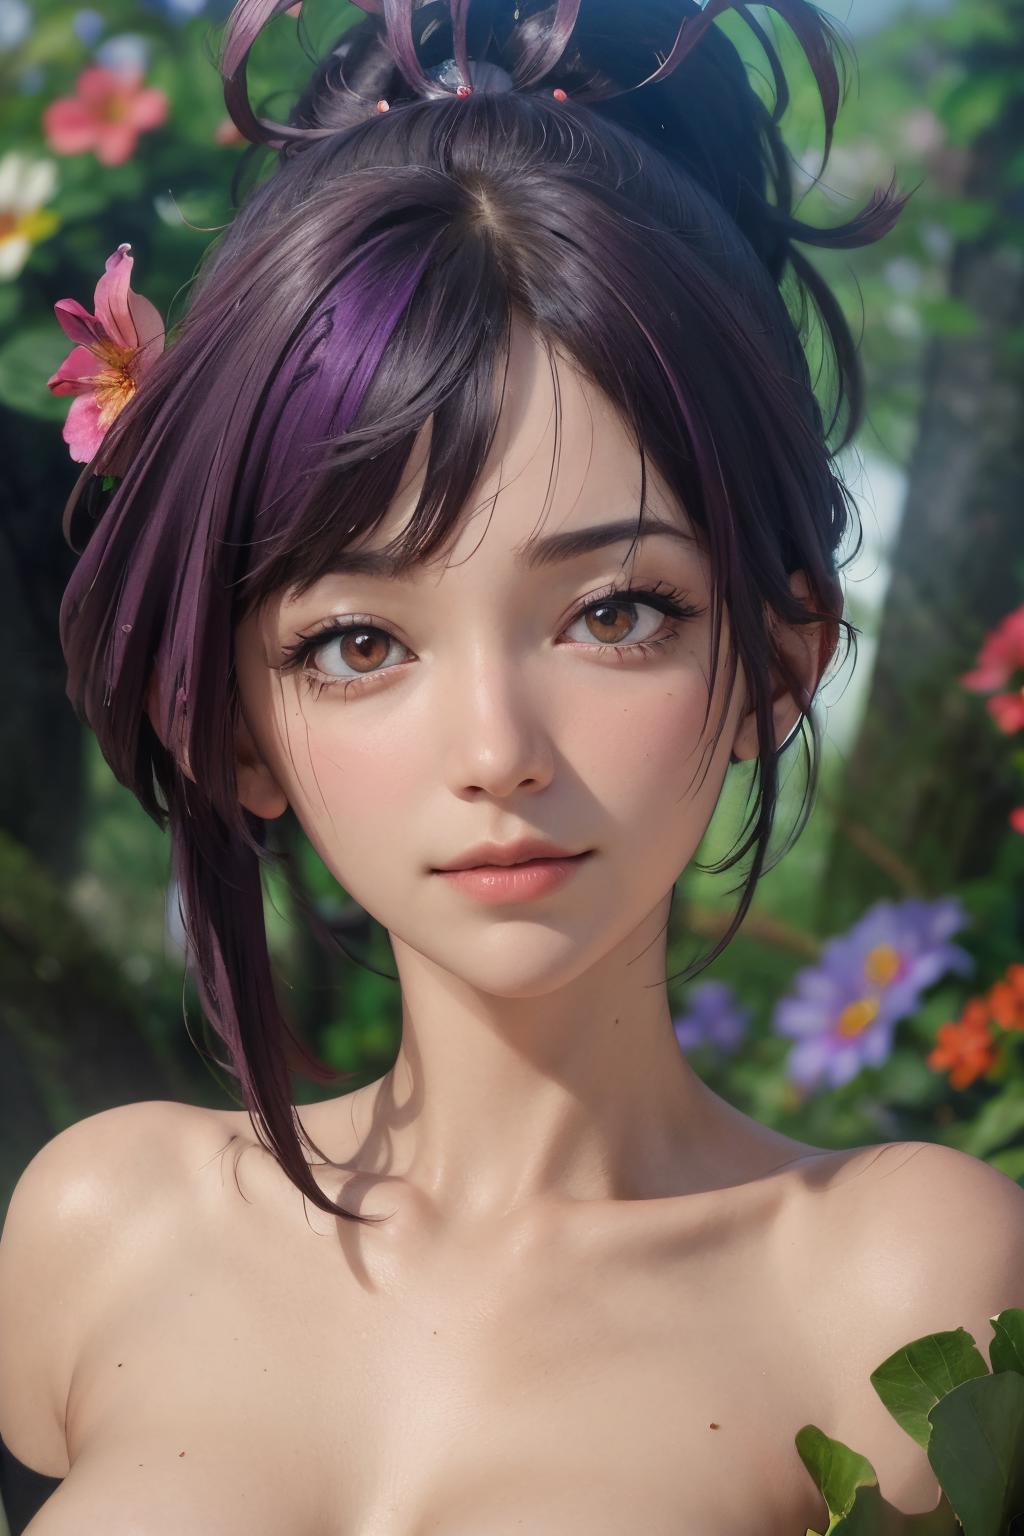 AI model image by aigirl951877